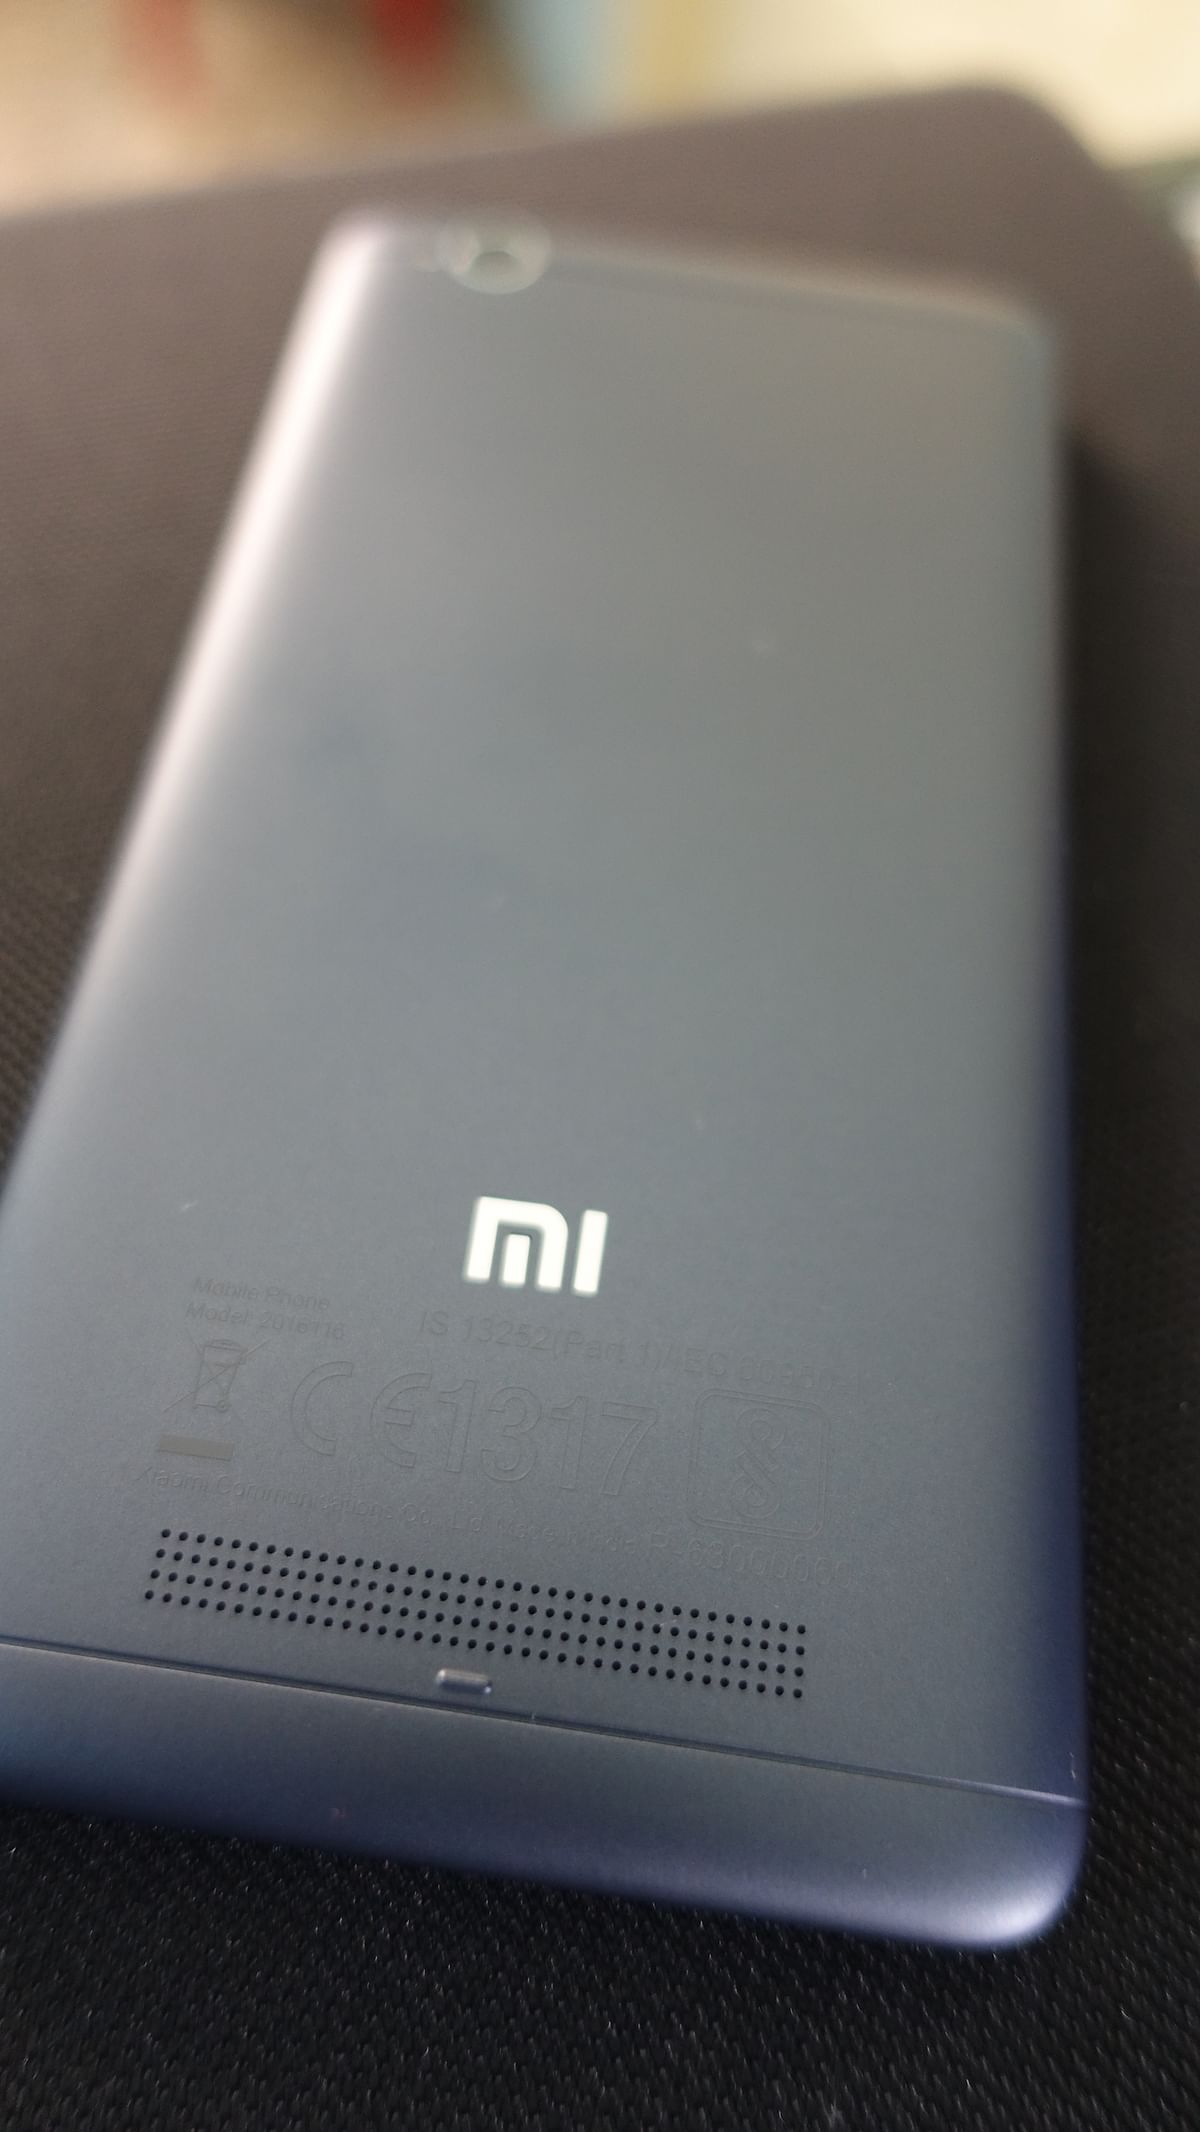 The Redmi 4A from Xiaomi is the entry-level successor to the Redmi 1S. 